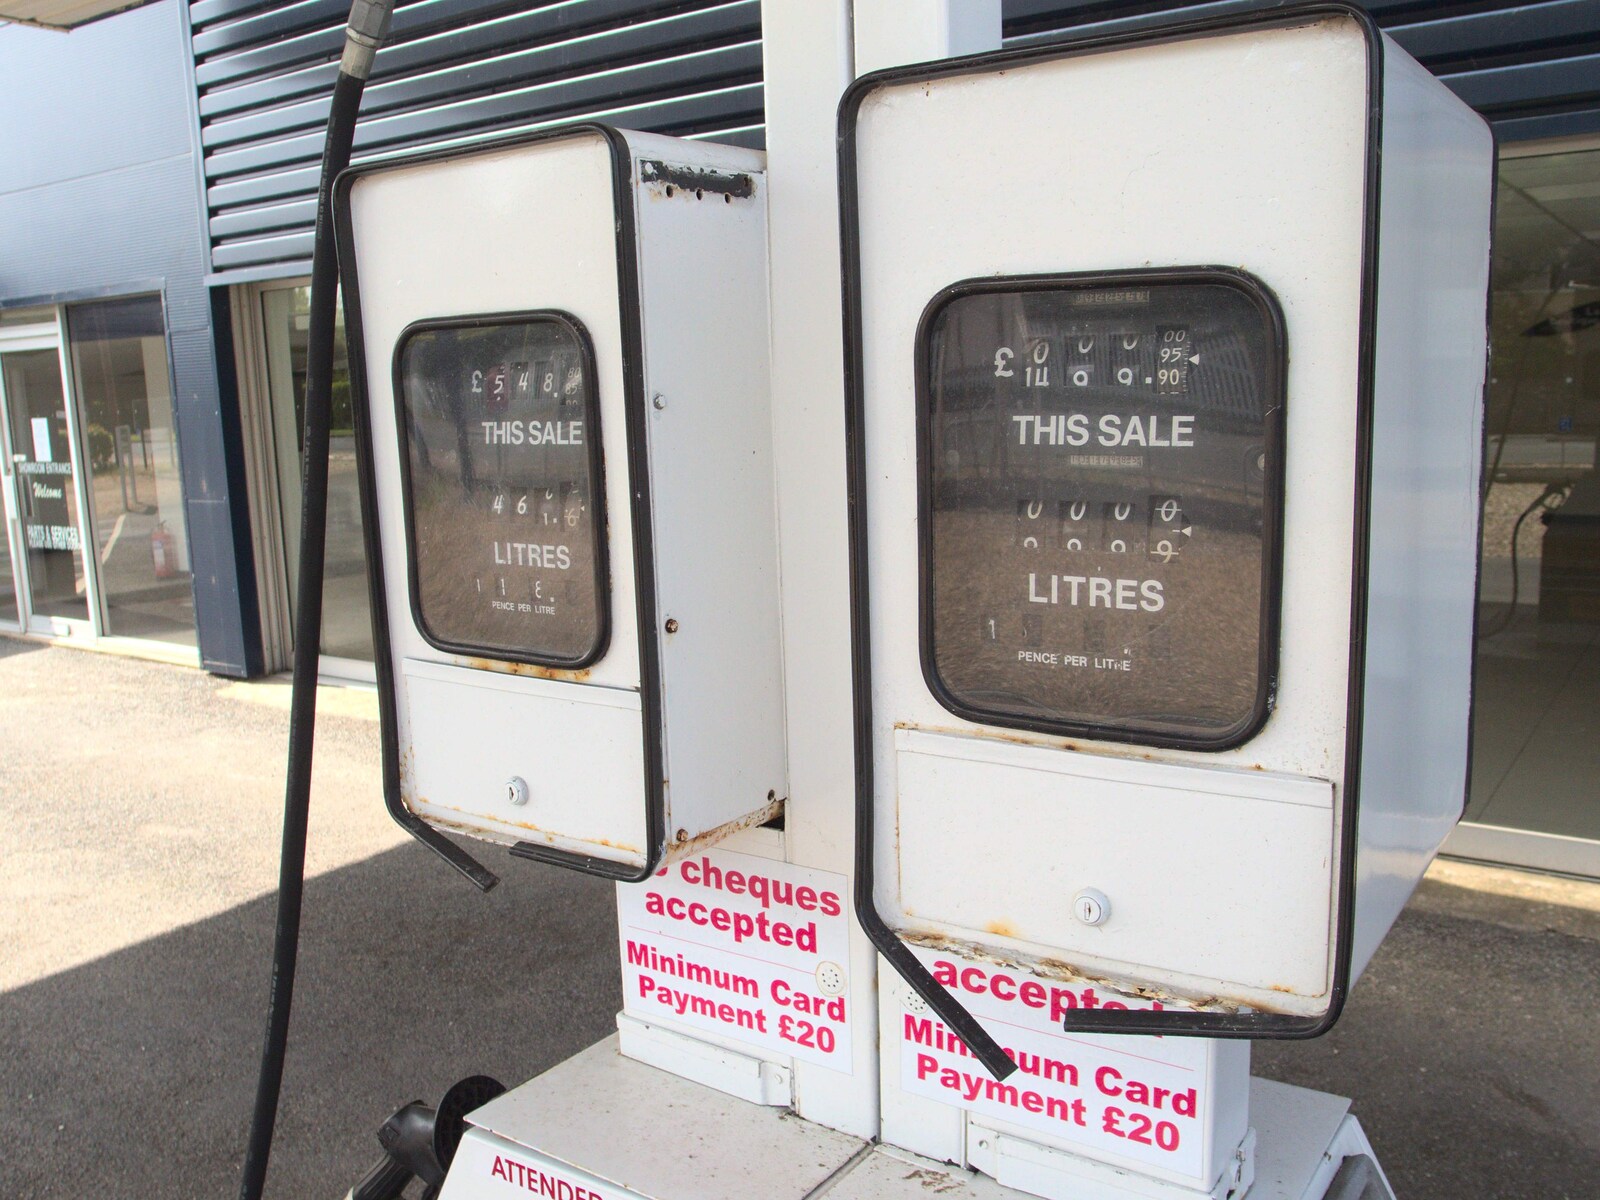 A last sale of £54.80 from A Derelict Petrol Station, Palgrave, Suffolk - 16th May 2015